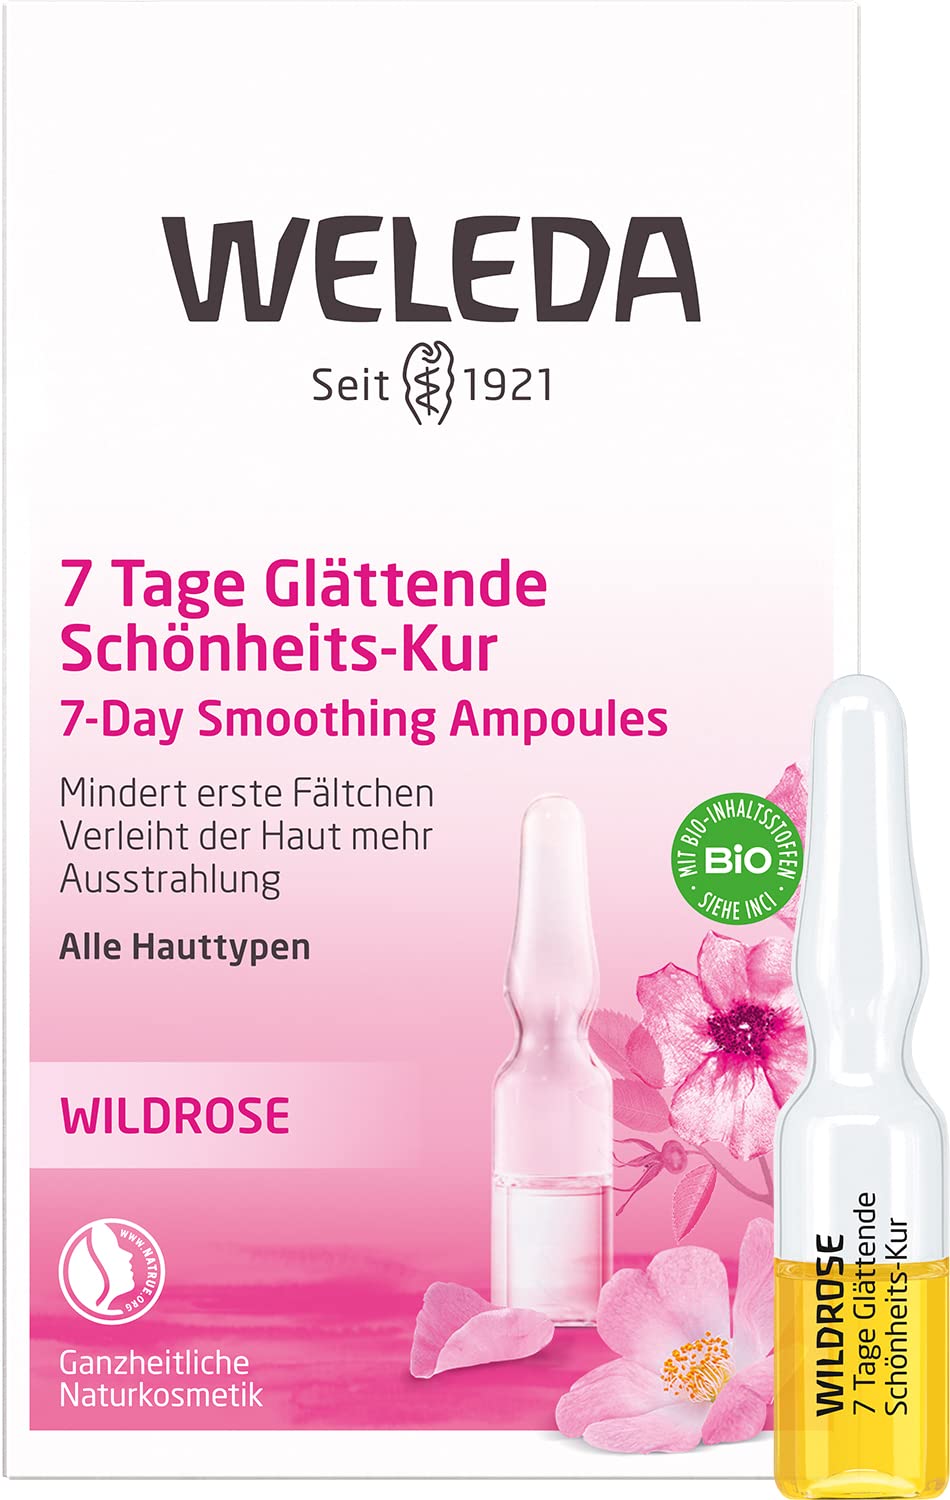 WELEDA Organic Wild Rose 7 Day Smoothing Beauty Treatment, Natural Cosmetics Care Oil Treatment for Reducing Wrinkles and for More Radiance of Skin on the Face, for Seven Day Use (7 x 0.8 ml)